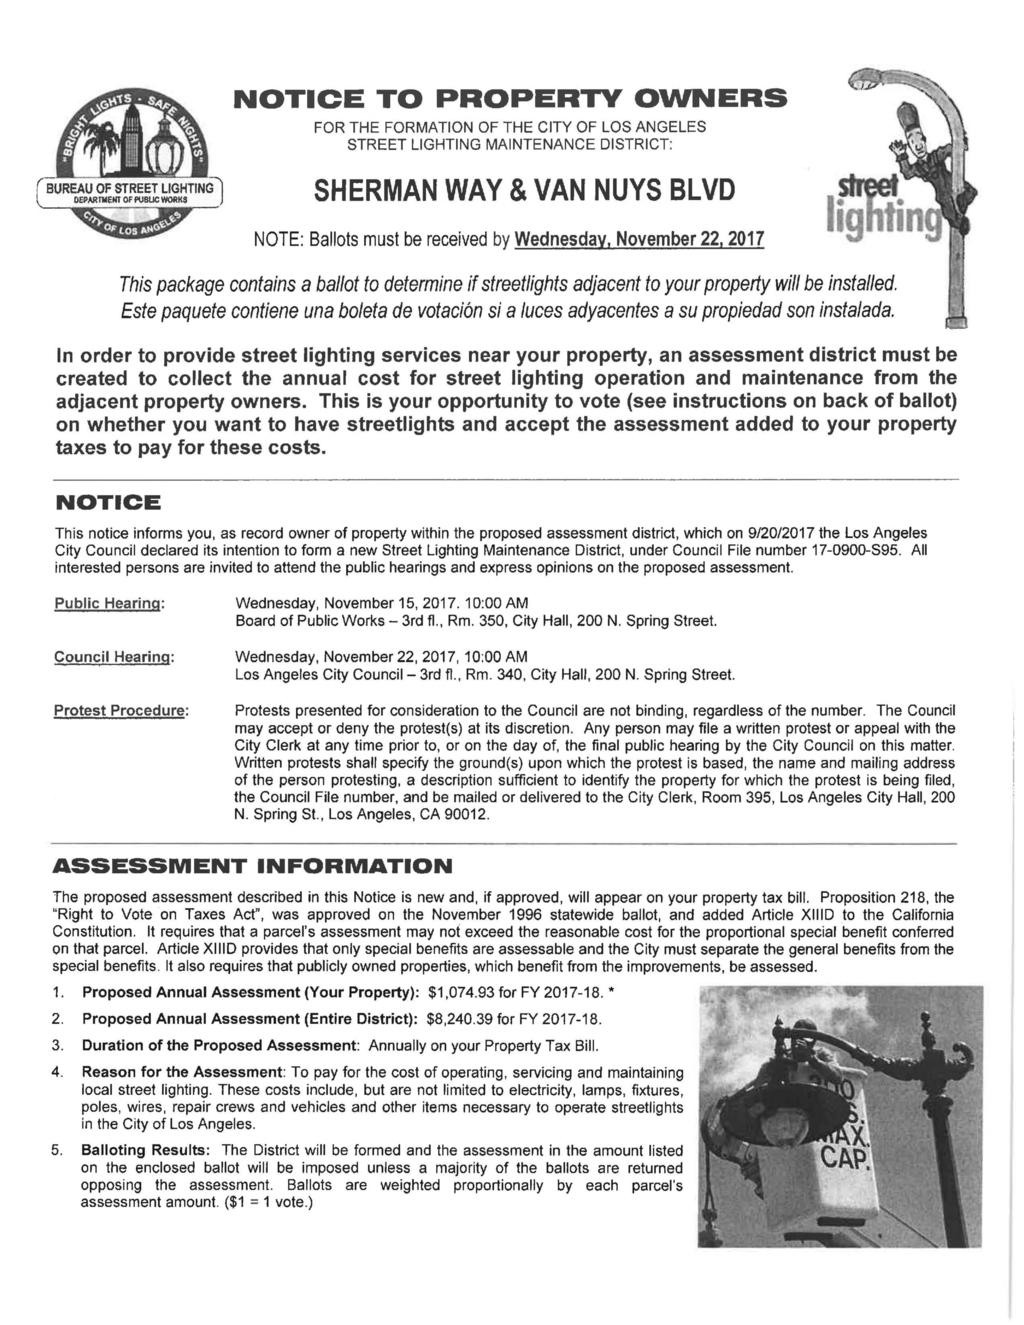 NOTICE TO PROPERTY OWNERS FOR THE FORMATION OF THE CITY OF LOS ANGELES STREET LIGHTING MAINTENANCE DISTRICT: BUREAU OF STREET LIGHTING^! DEPARTMENT OF PUBLIC WORKS ) [nl*!